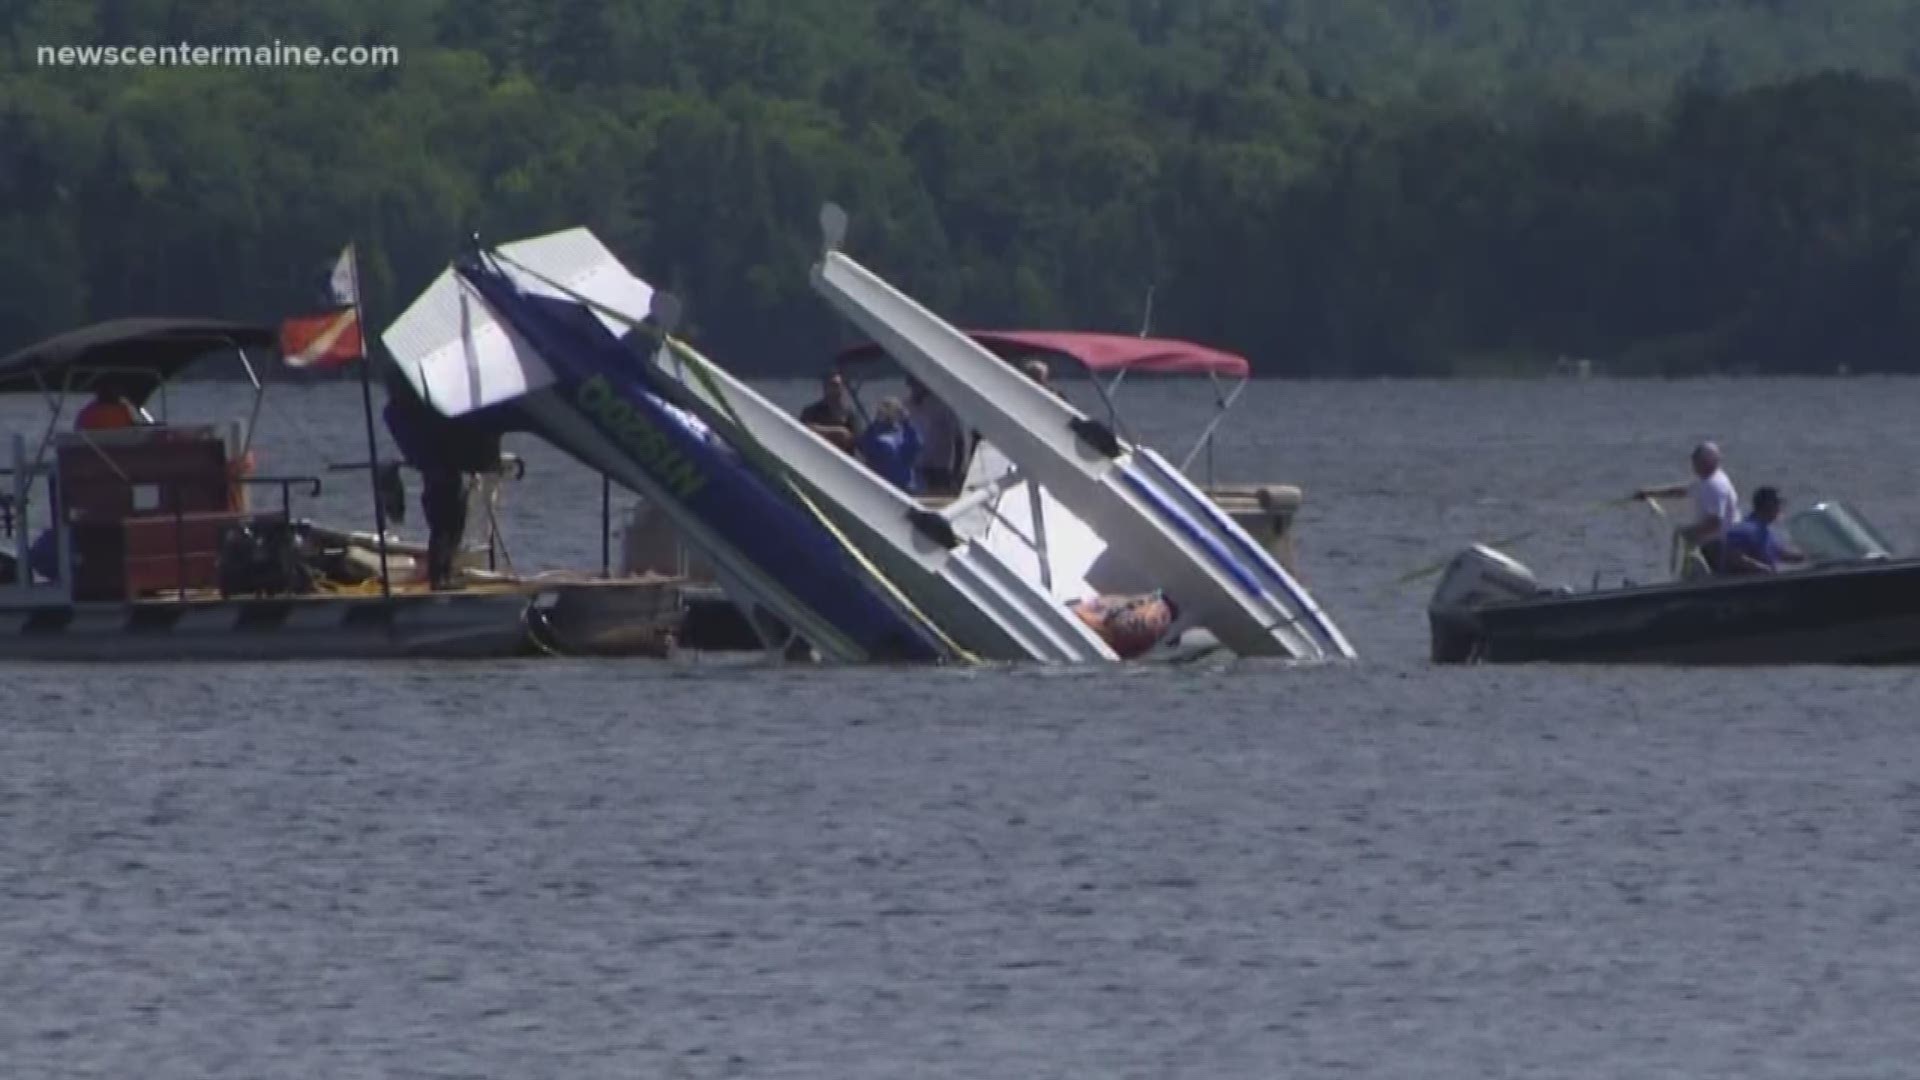 The Federal Aviation Administration is investigating a small plane crash that happened Thursday near Russell Cove on Rangeley Lake.